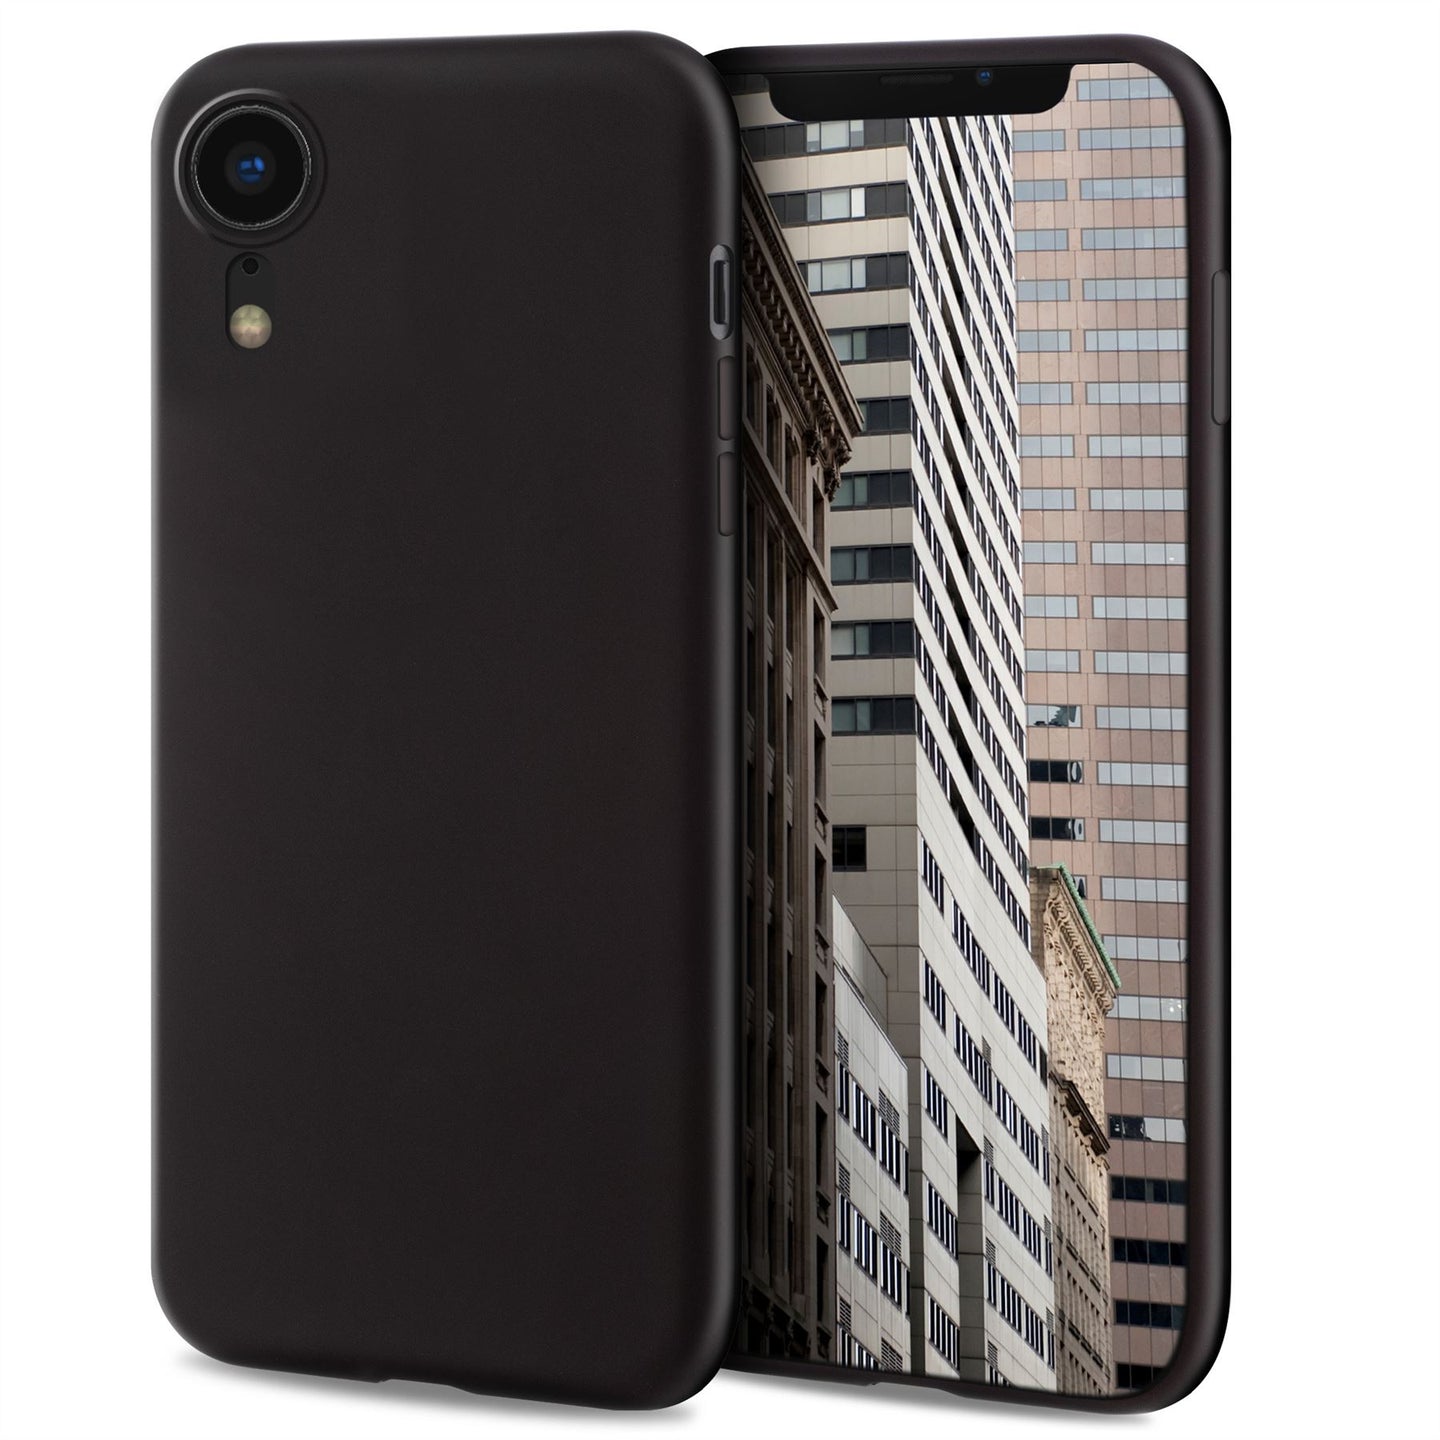 Moozy Lifestyle. Designed for iPhone XR Case, Black - Liquid Silicone Cover with Matte Finish and Soft Microfiber Lining